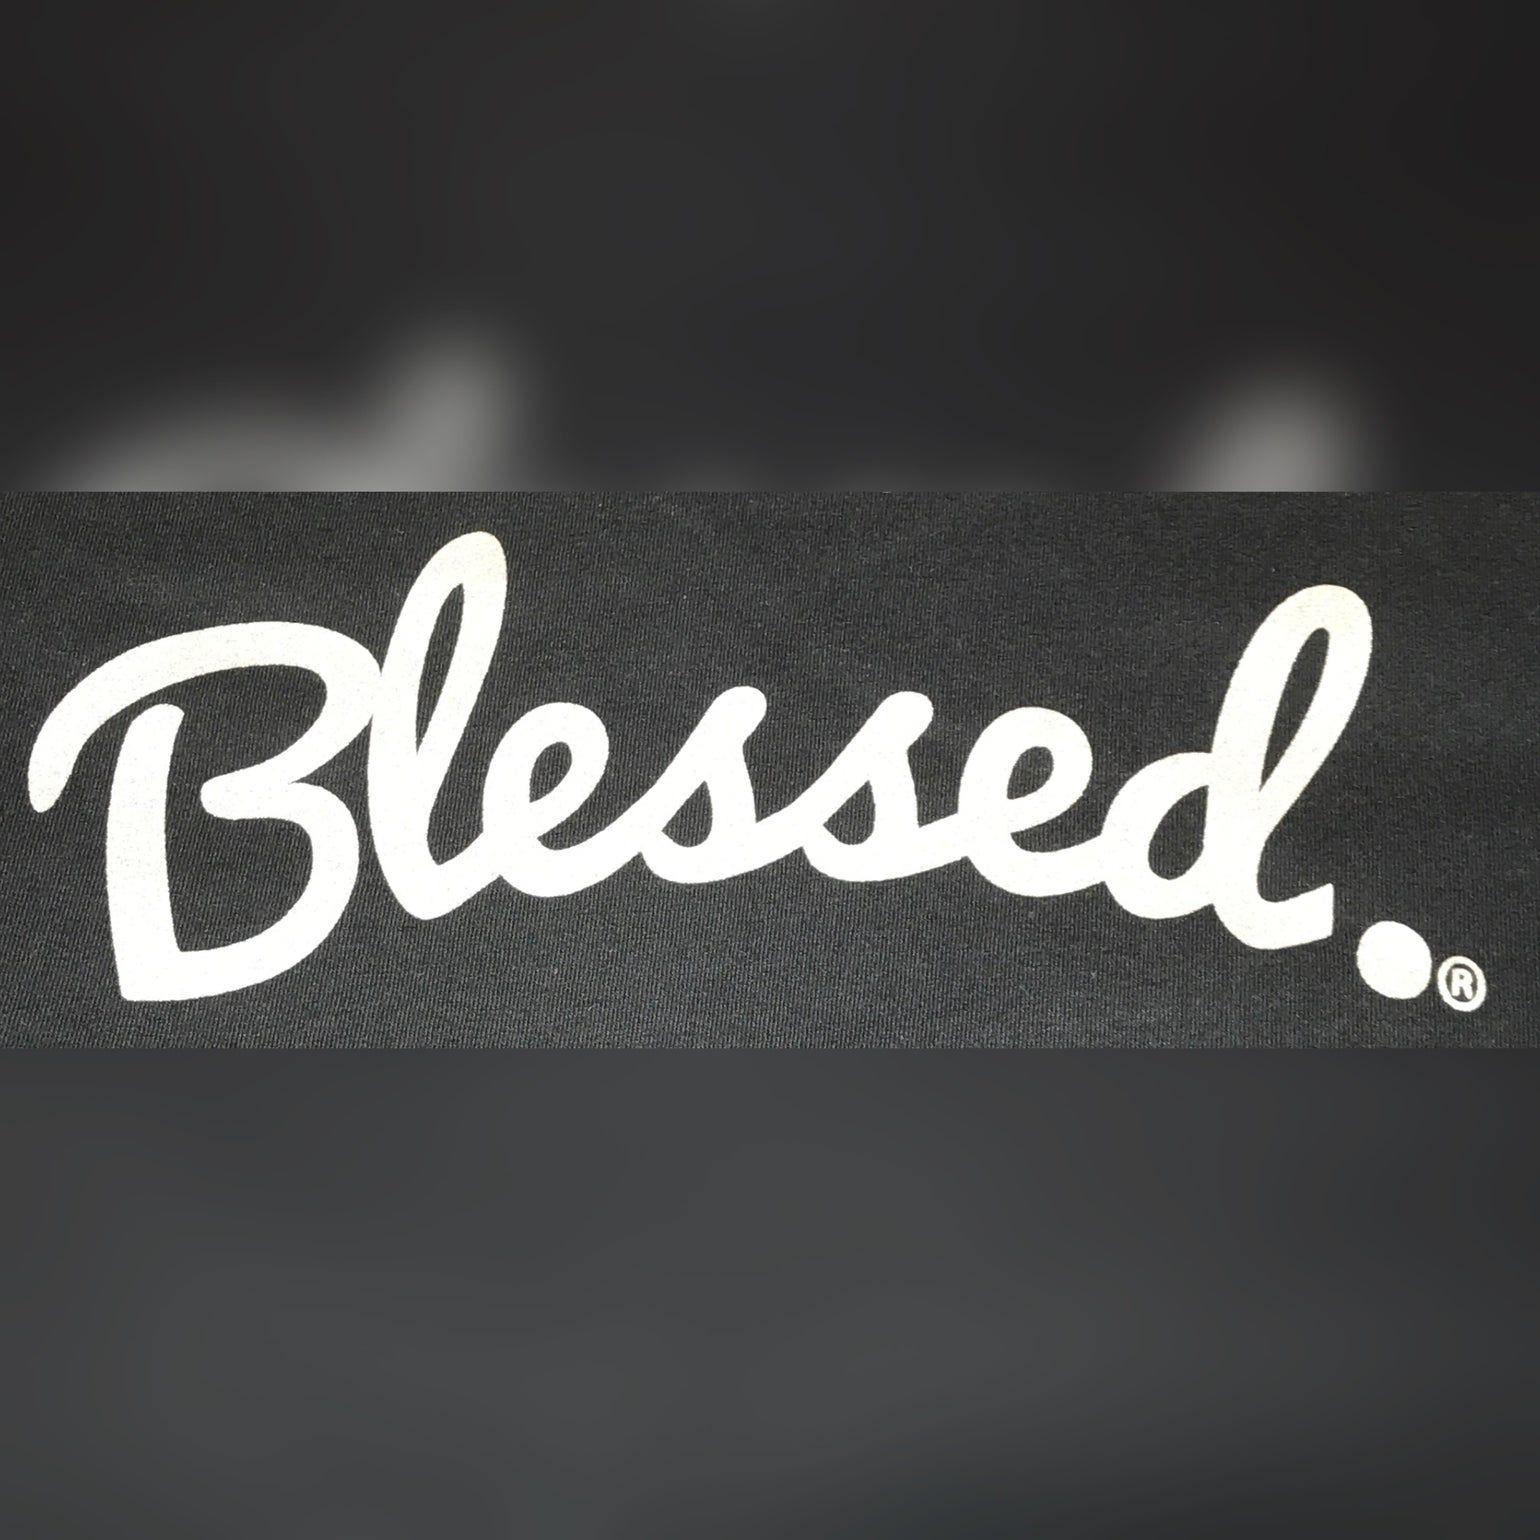 Blessed Logo - Silver Blessed Period aka “Blessed.” Logo T